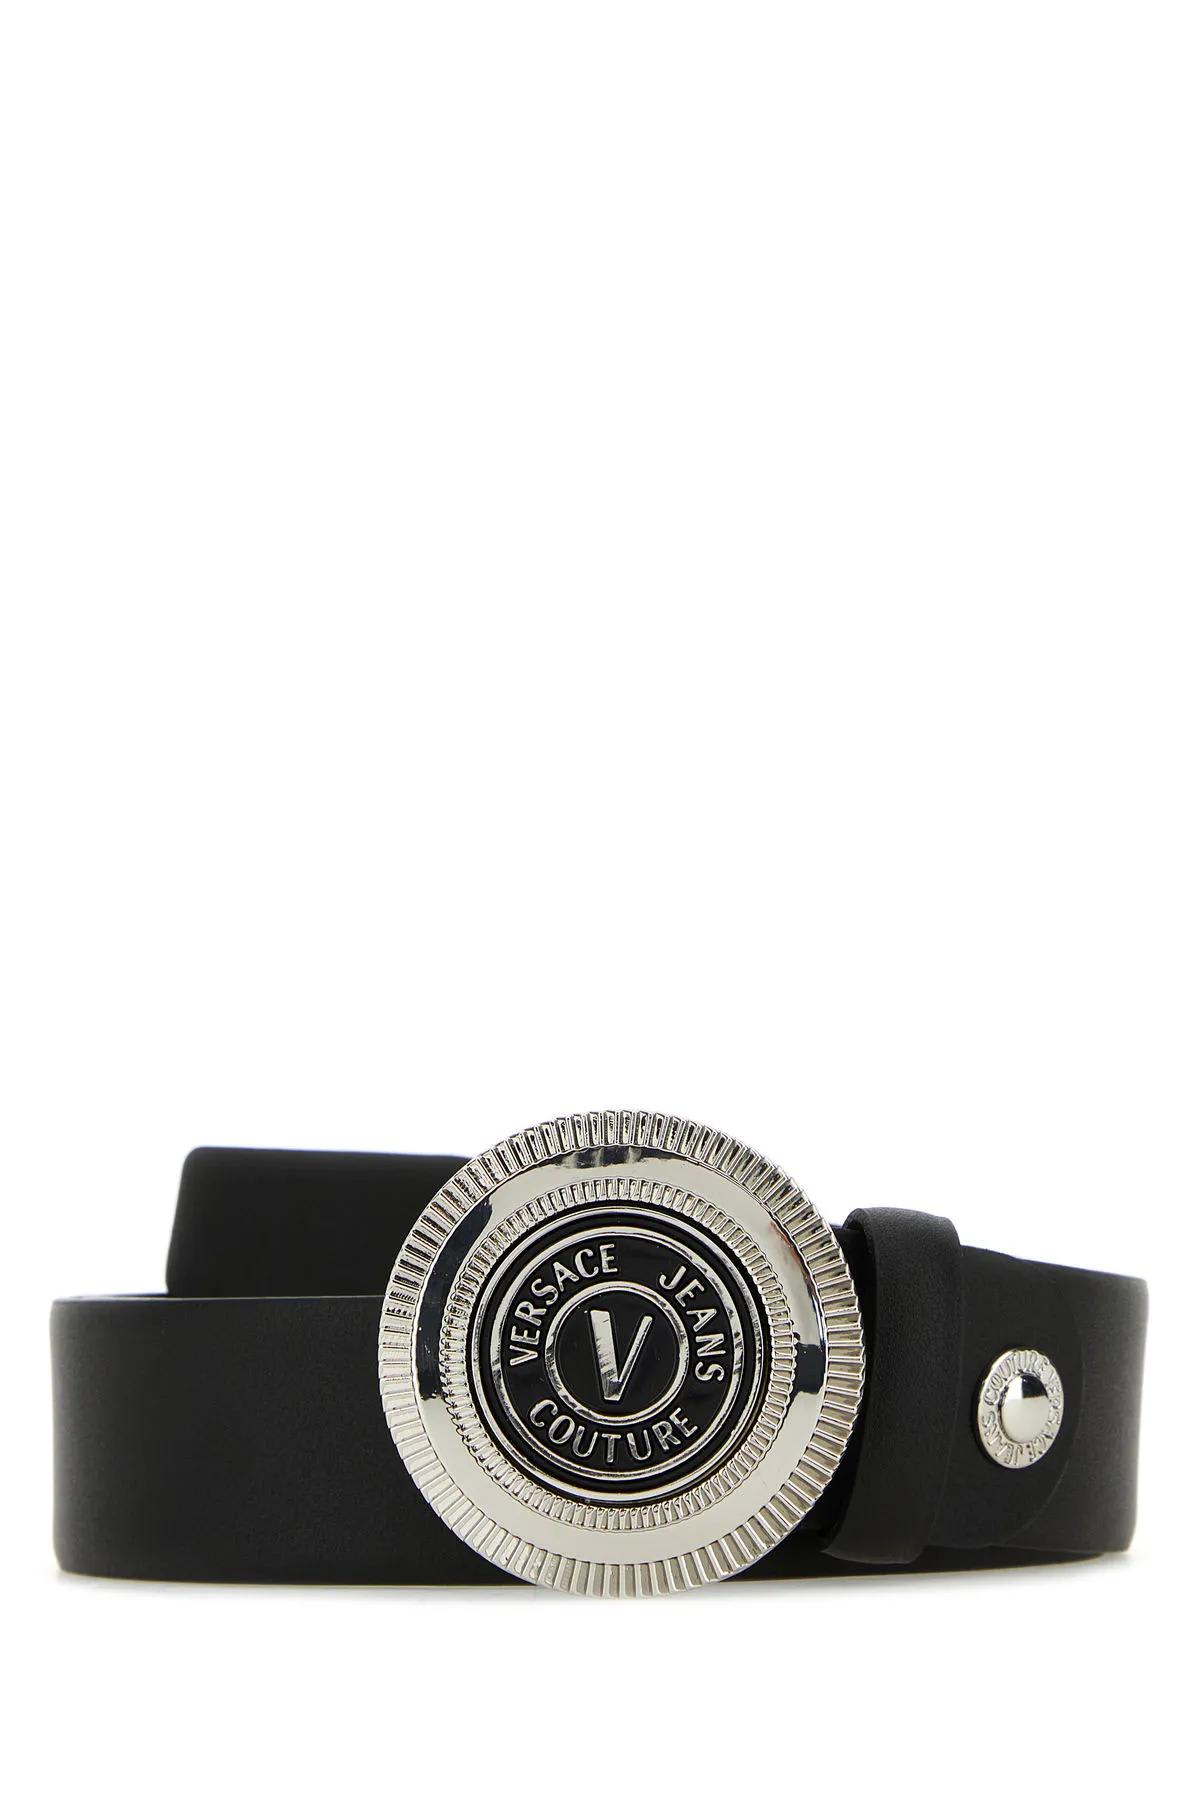 Versace Jeans Couture Belt Mens Black Leather Belt With Silver Buckle Brand  New